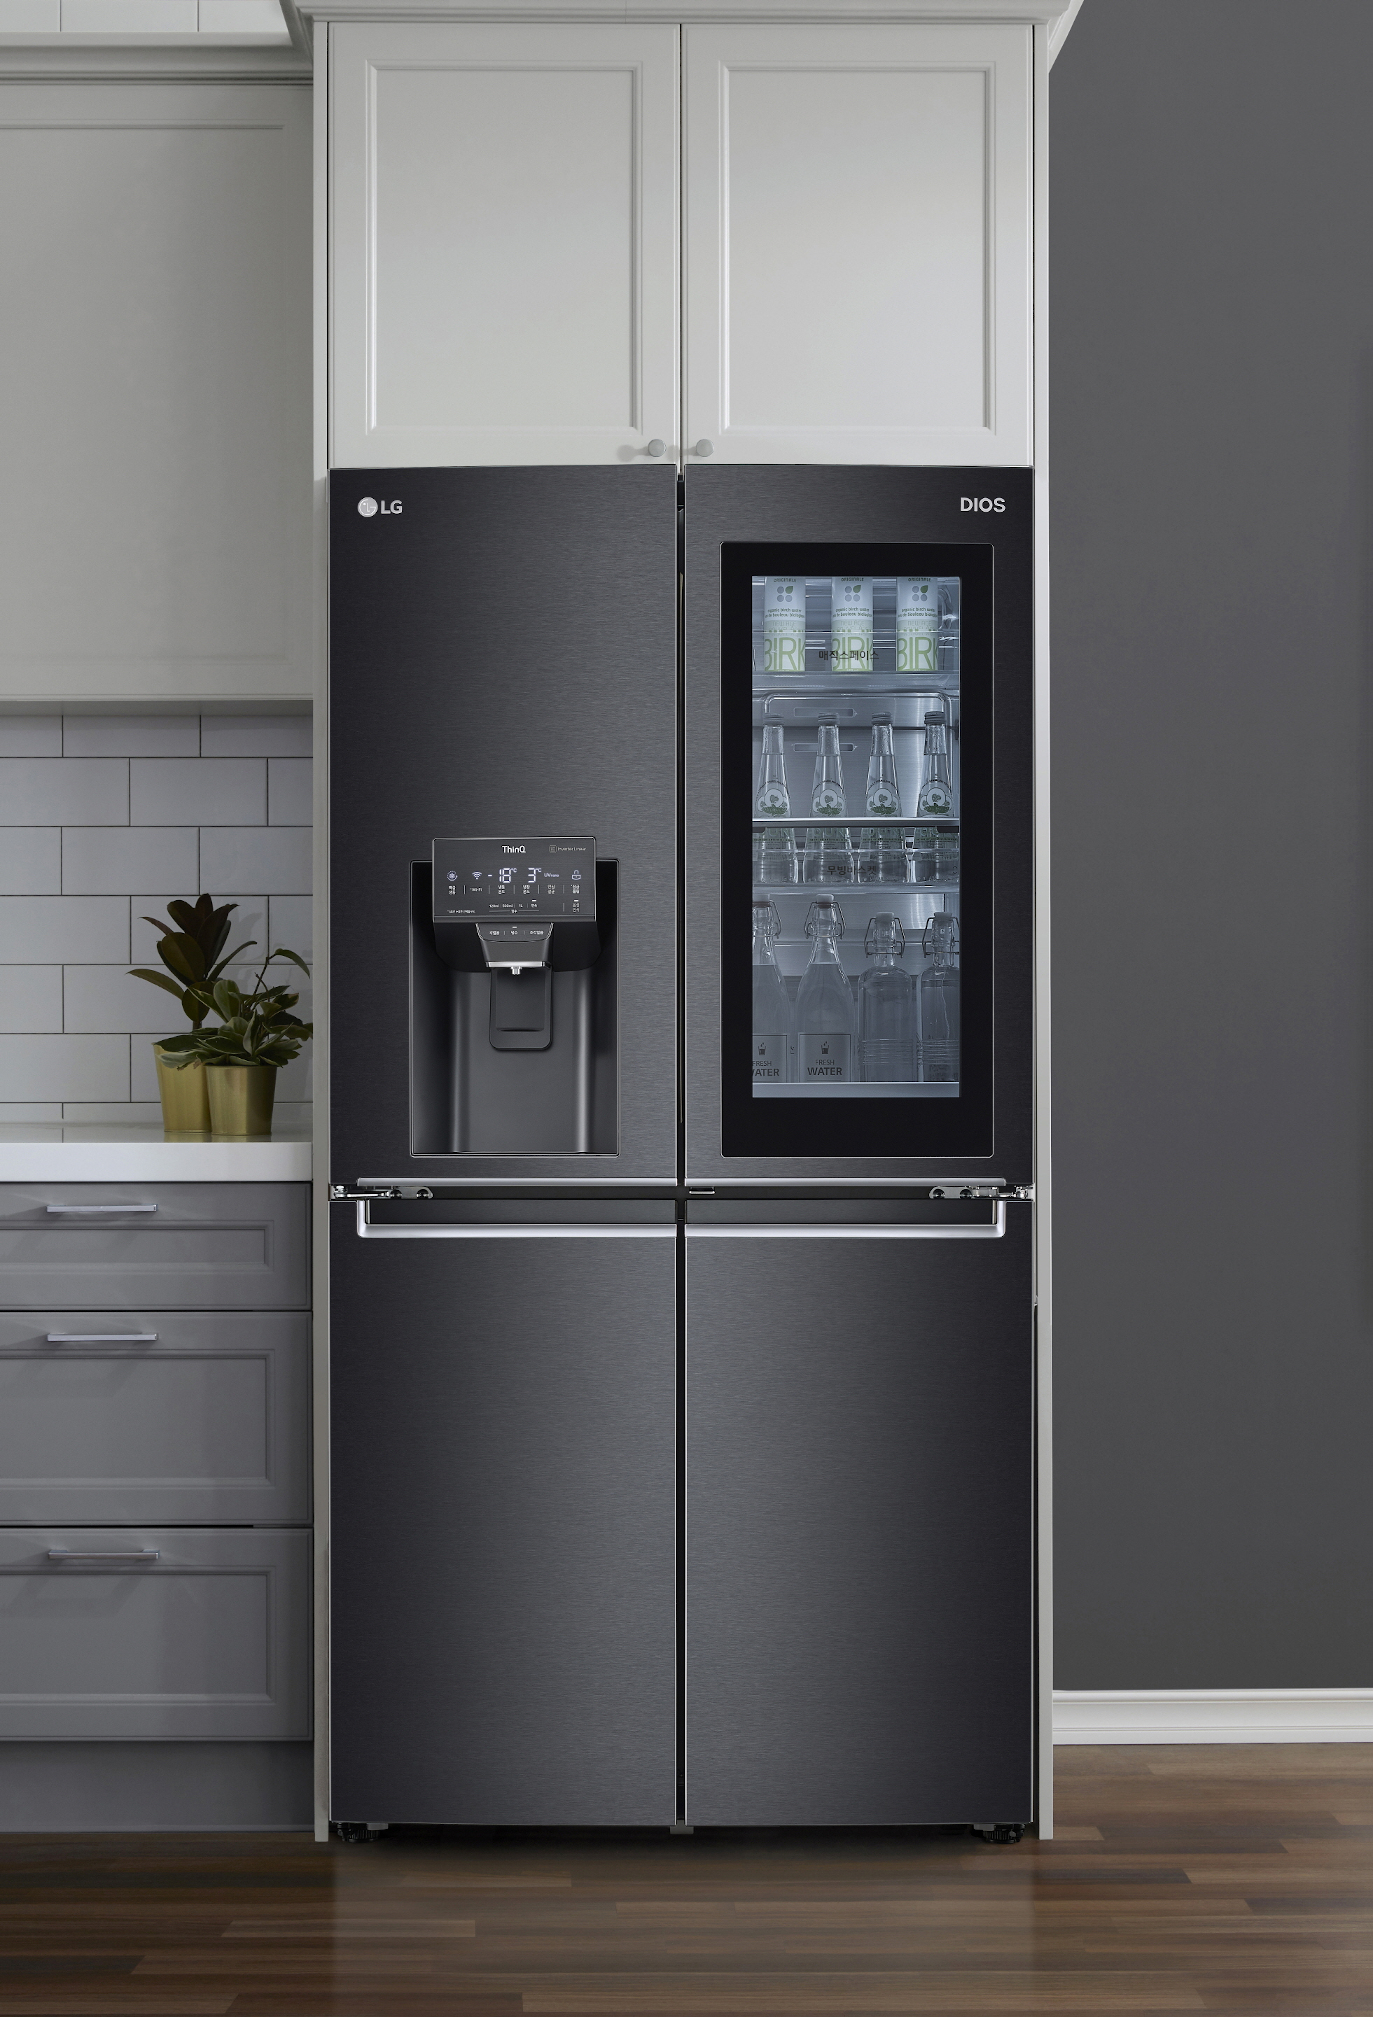 LG to showcase new InstaView refrigerator lineup at CES 2021